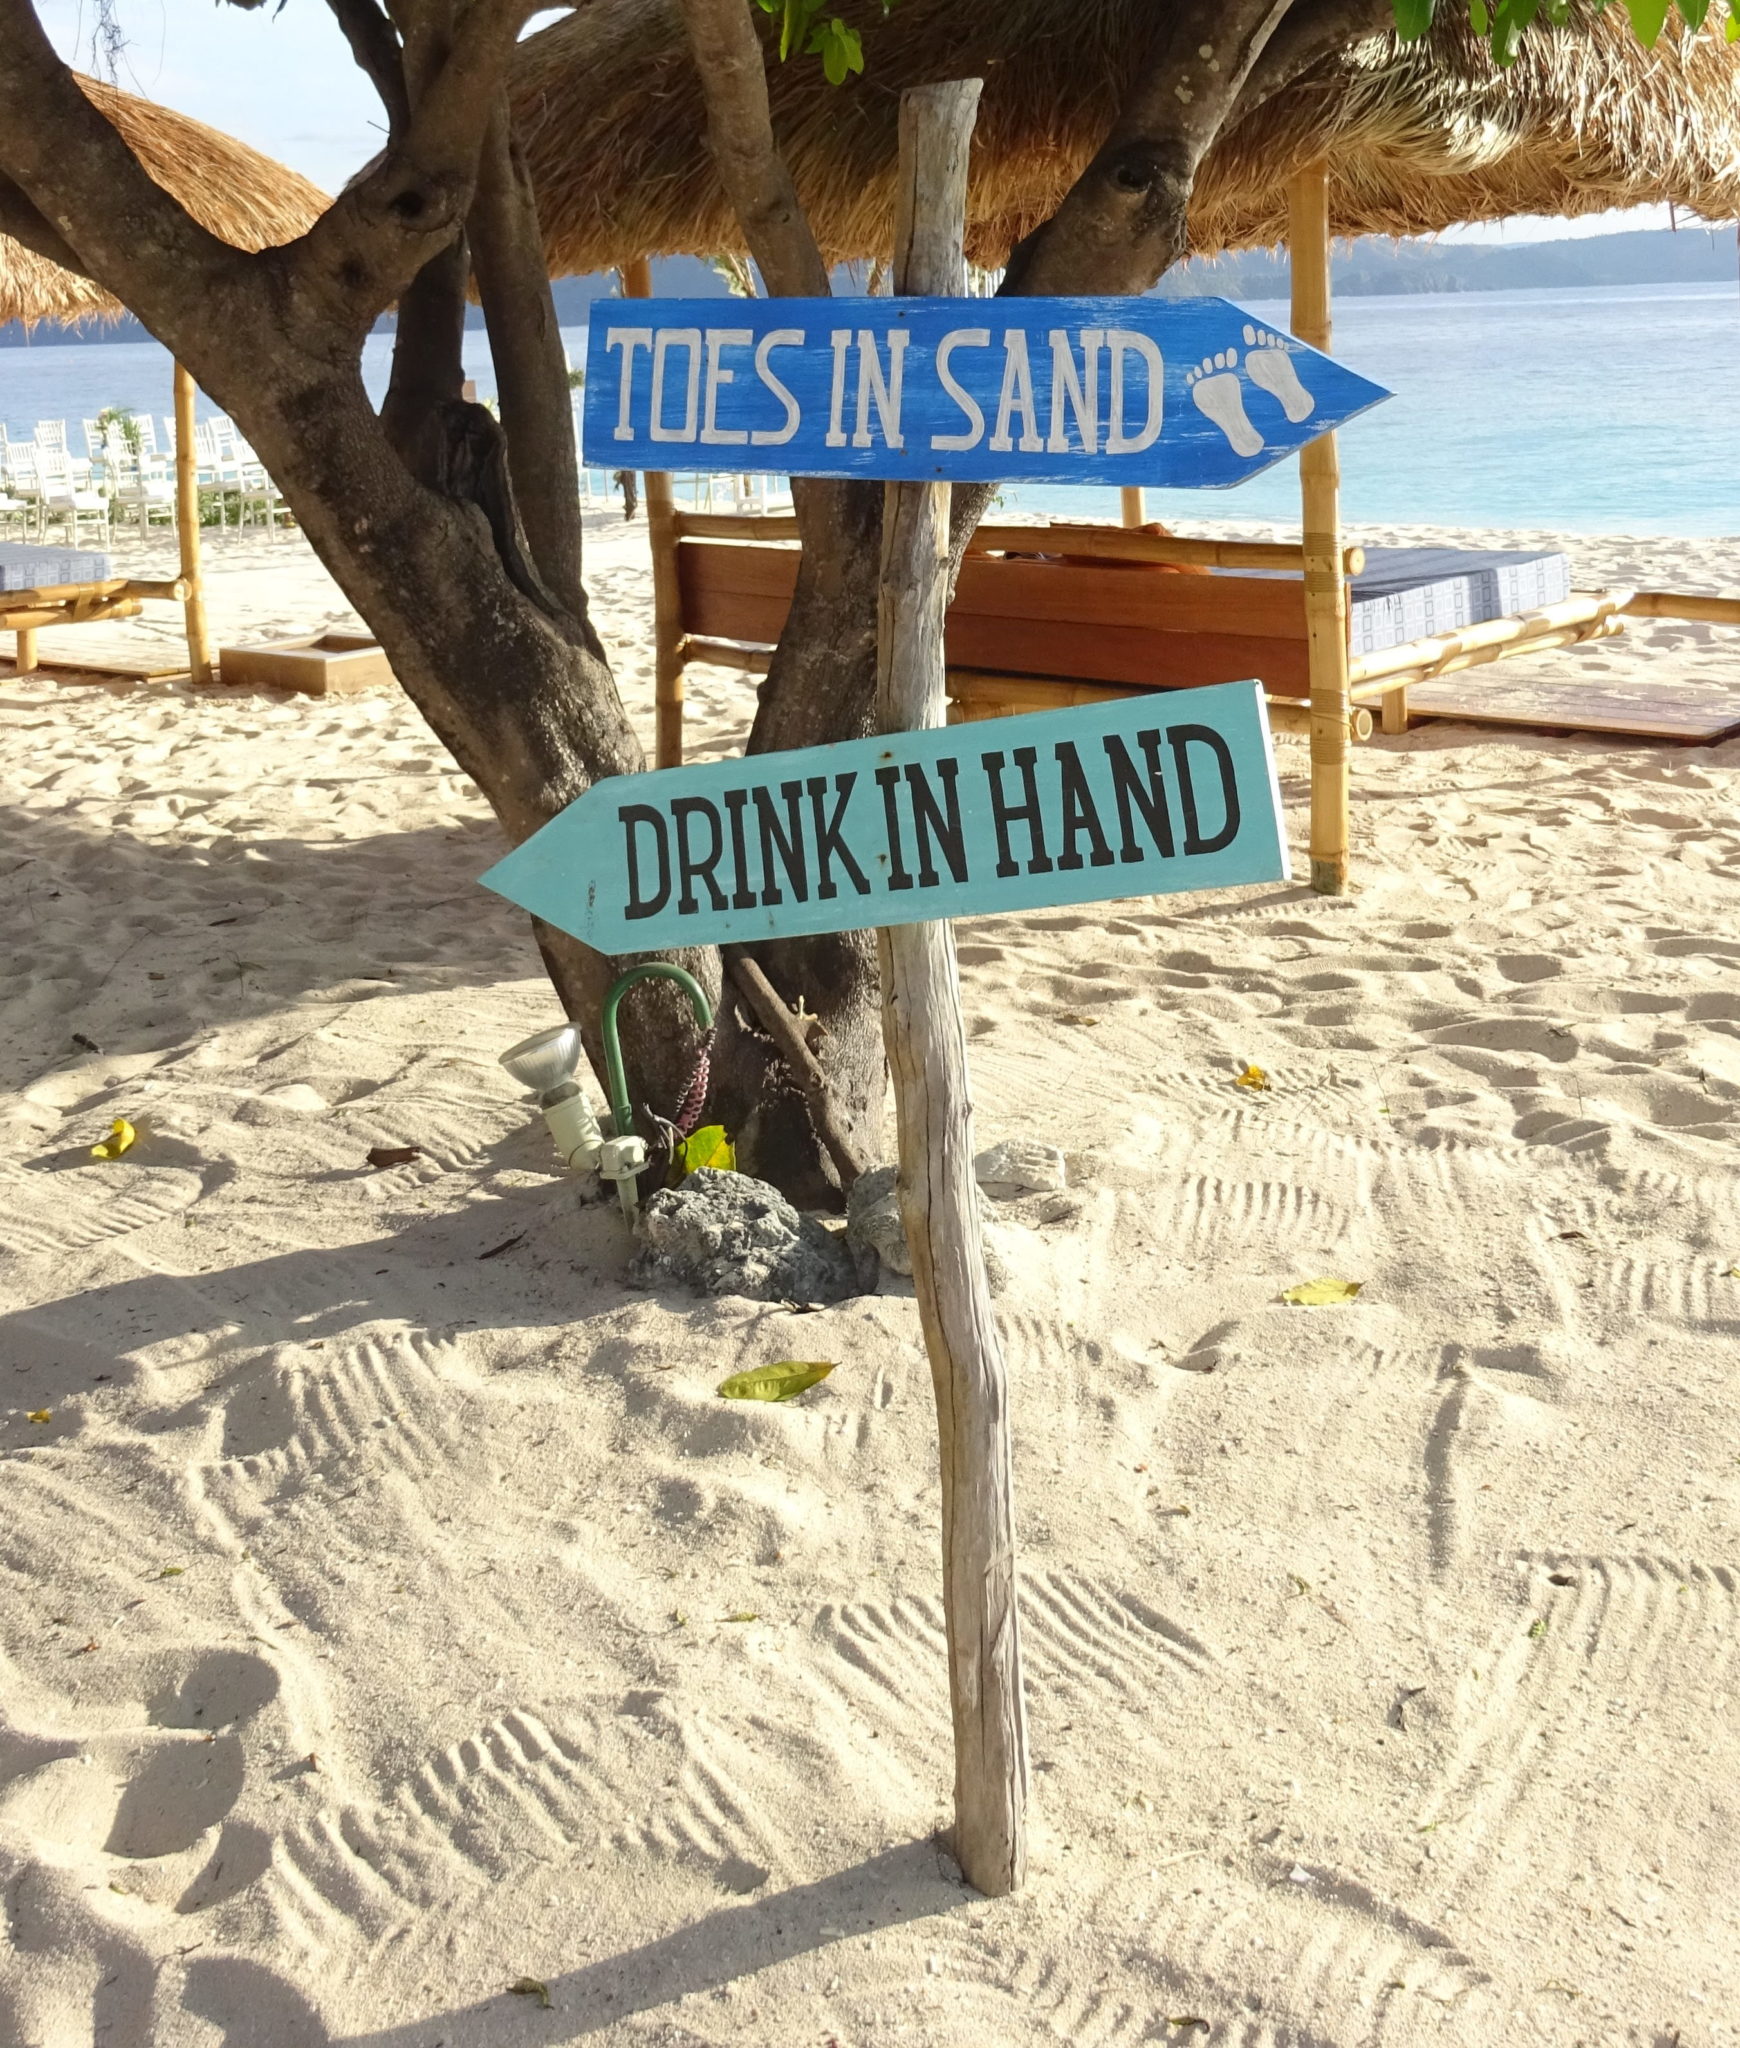 Wooden signs on a post in the beach reads 'toes in sand' and 'drink in hand'